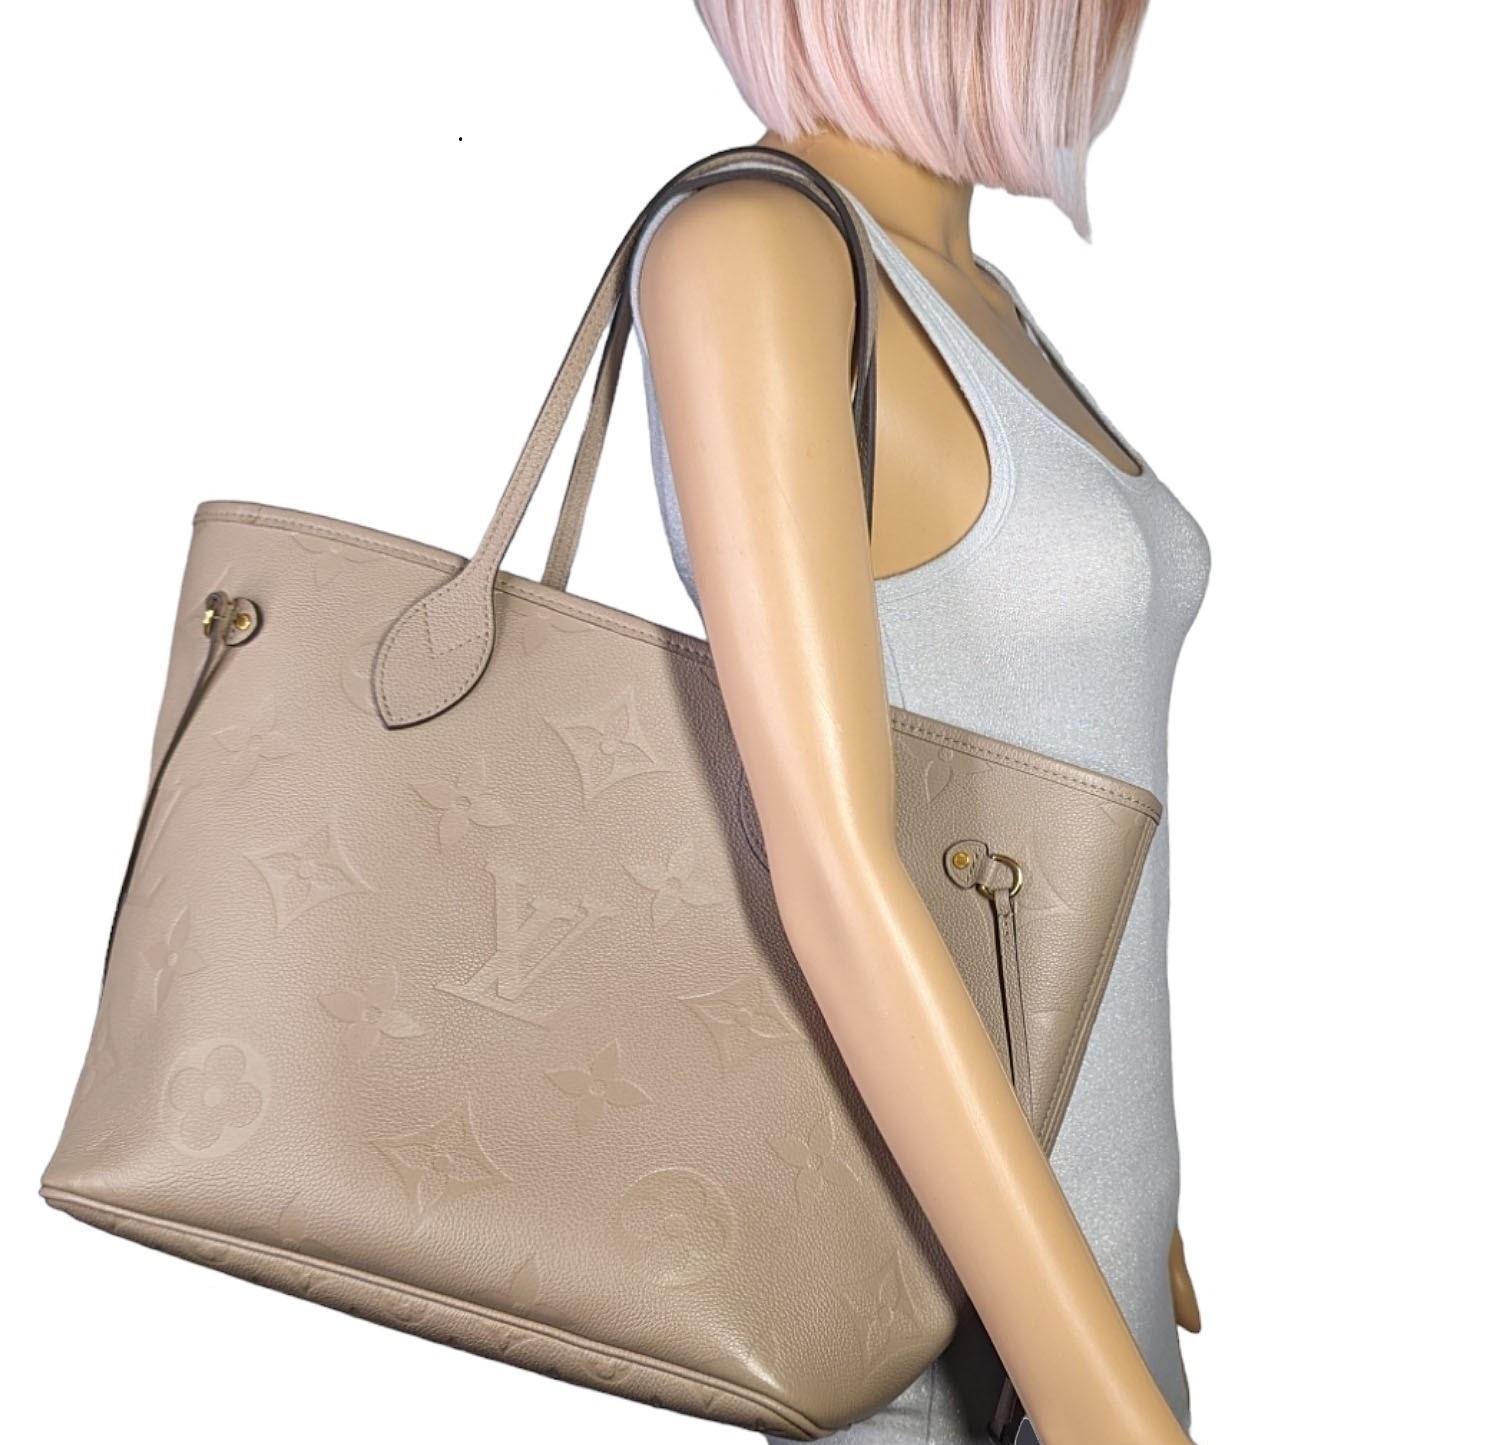 Louis Vuitton On the Go MM, Turtle Dove, New in Dustbag